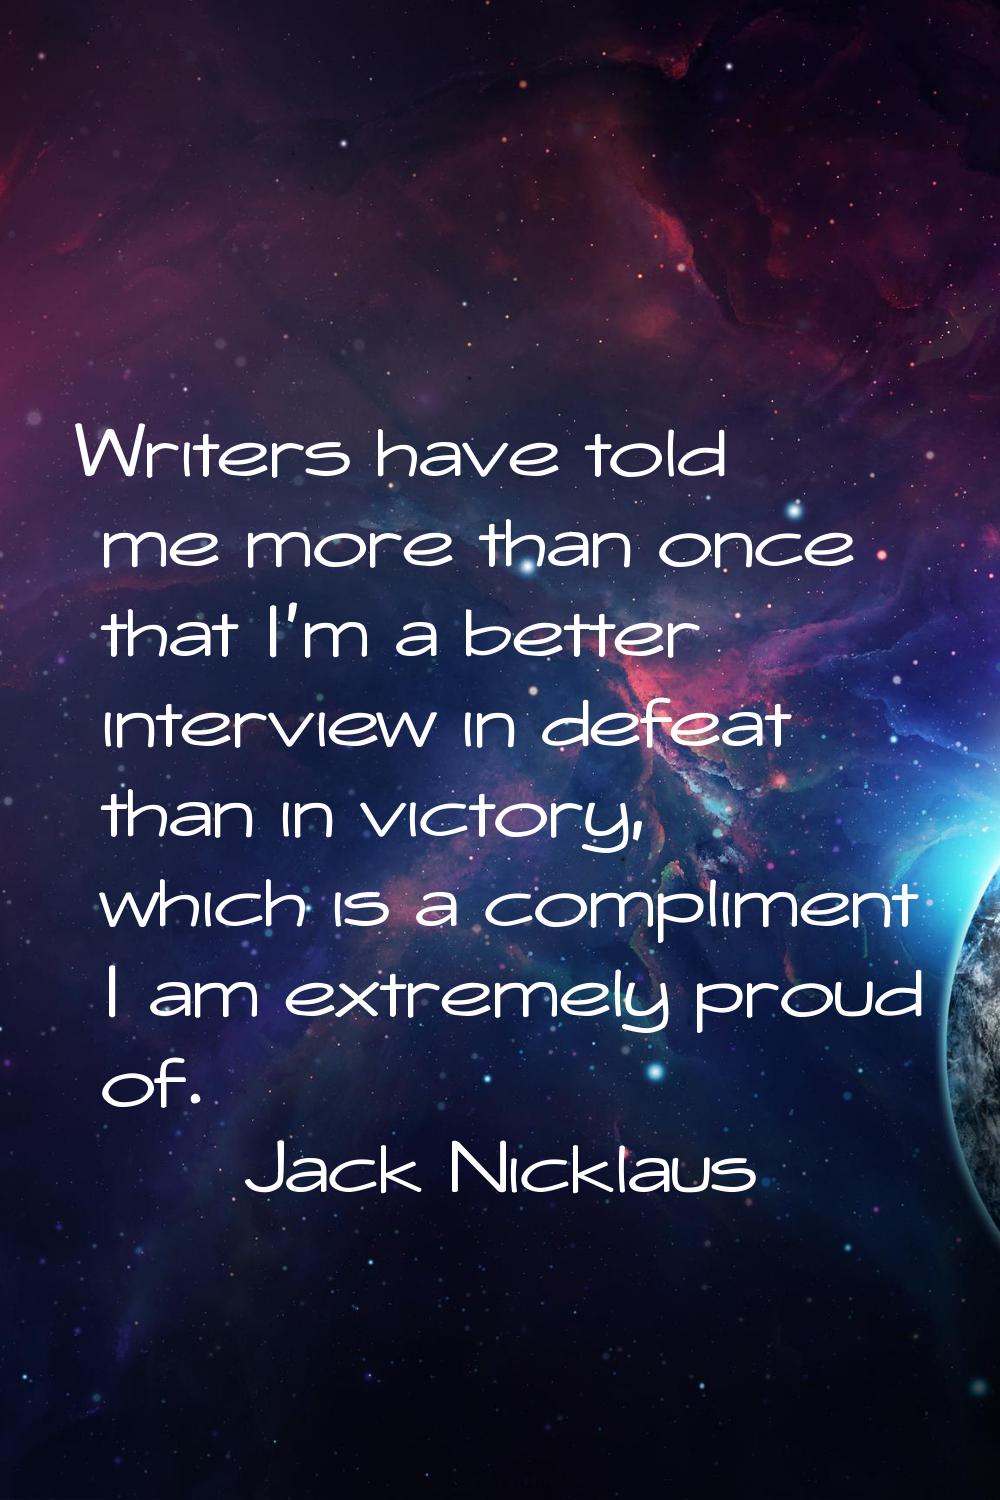 Writers have told me more than once that I'm a better interview in defeat than in victory, which is